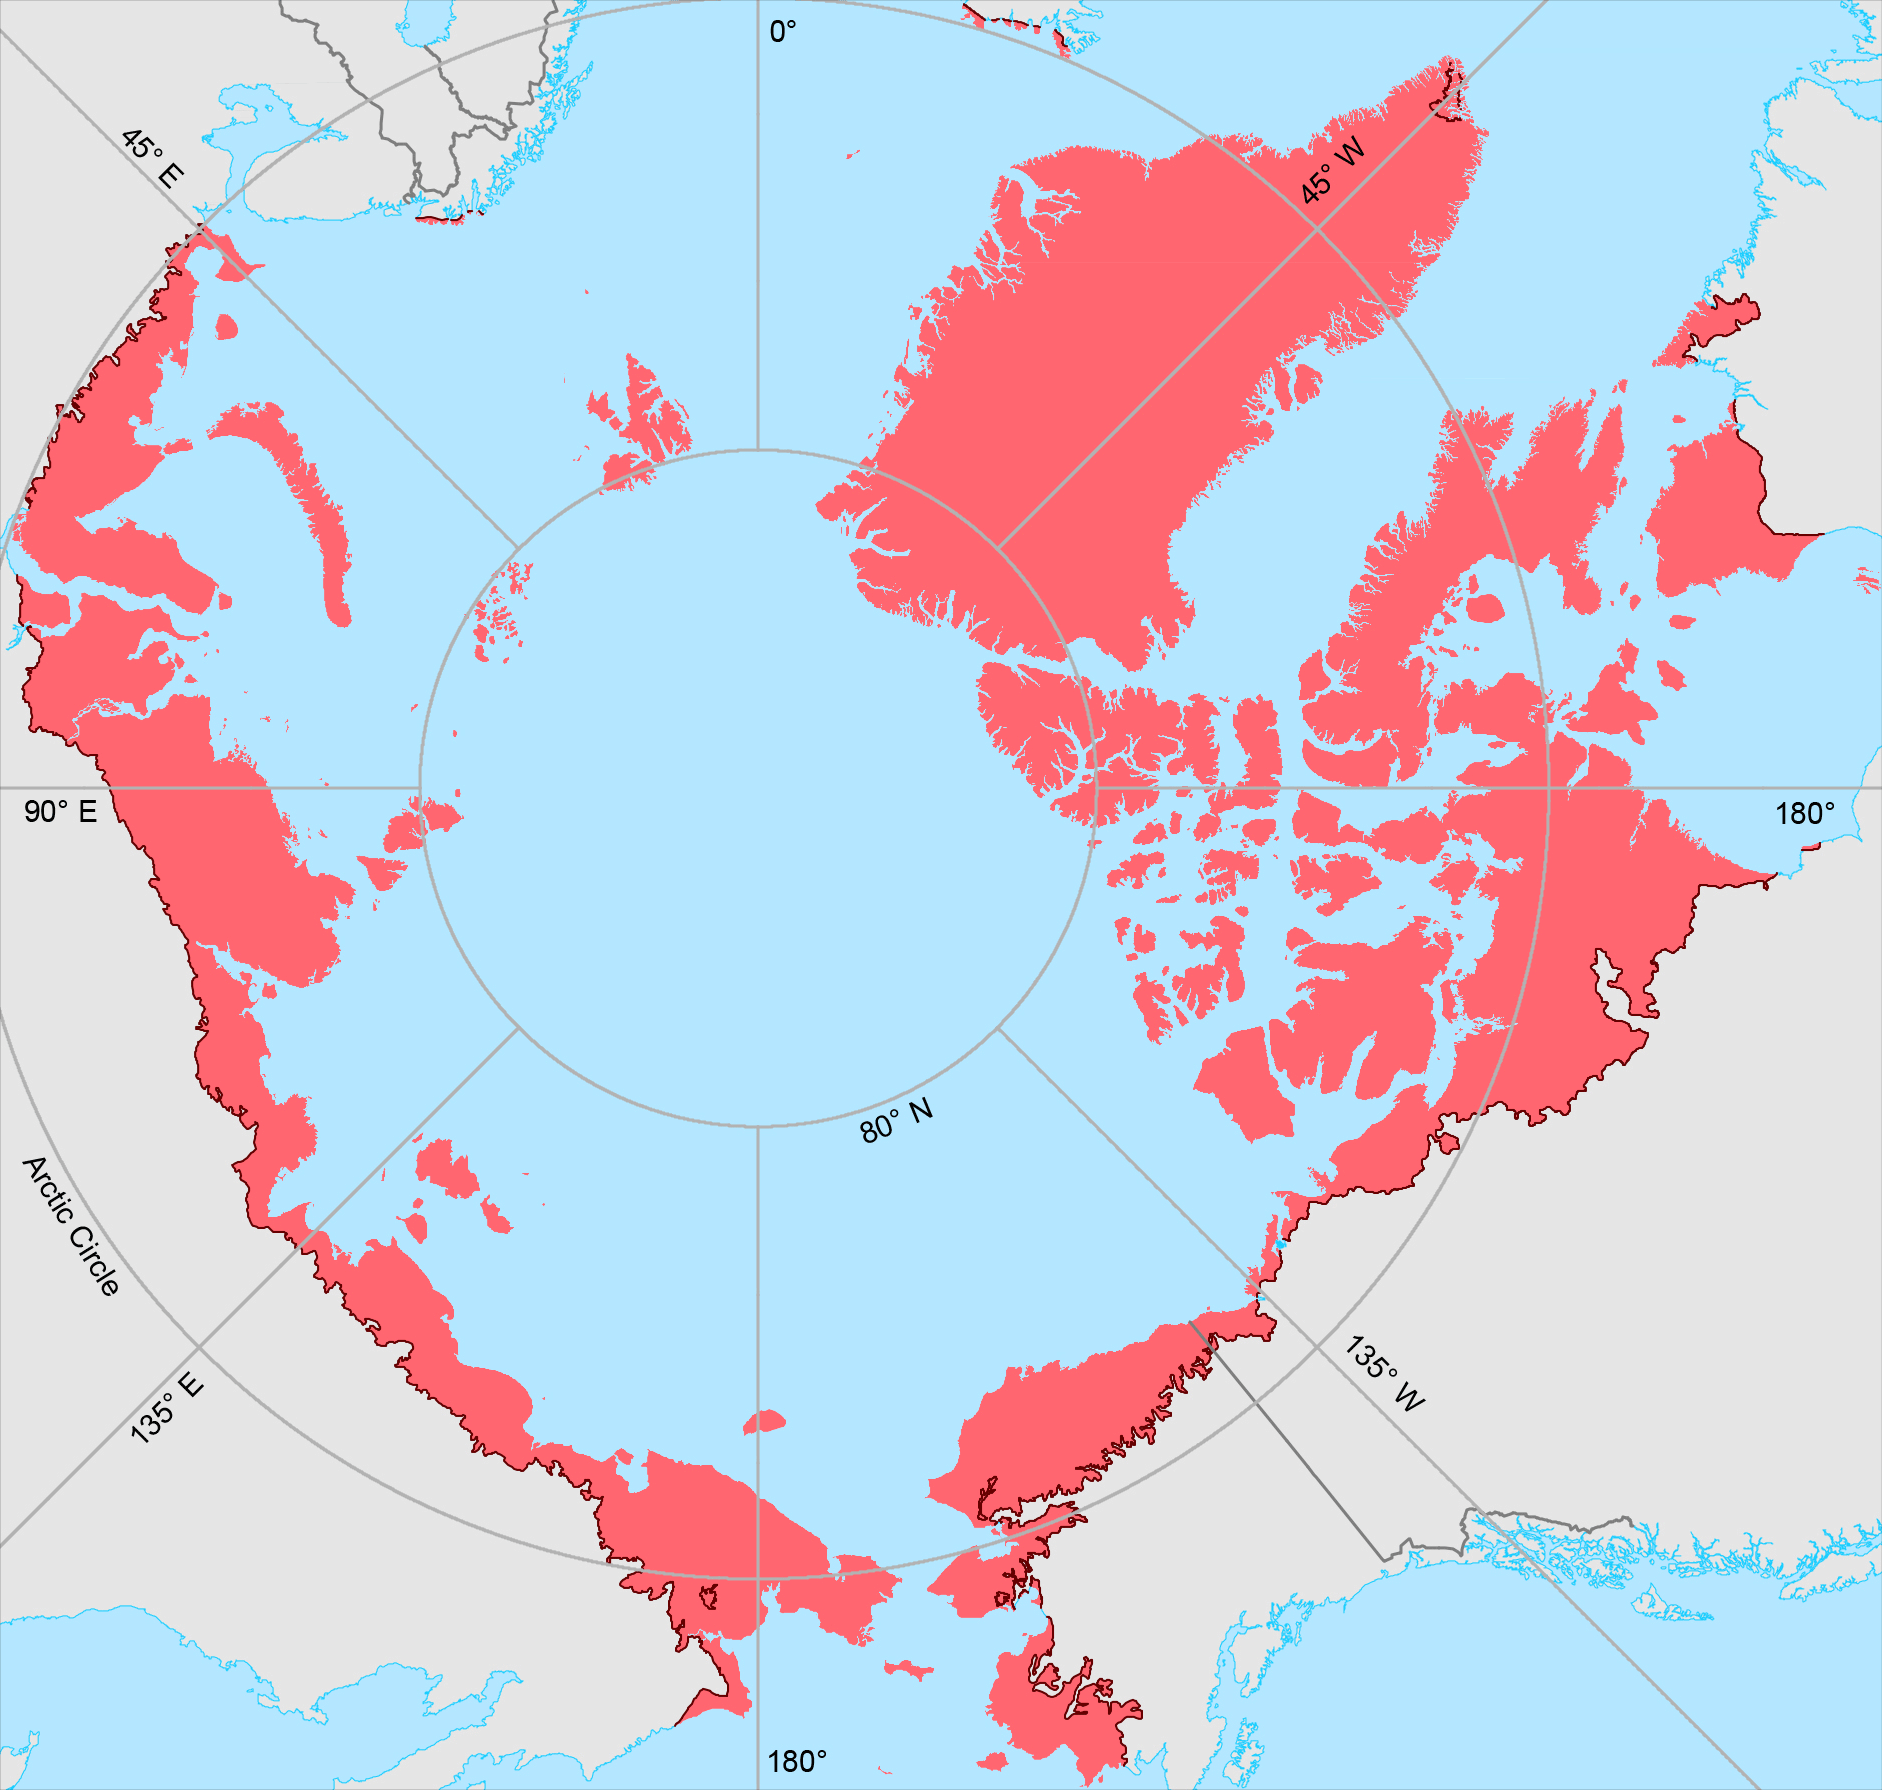 The tree line is the longest ecological transition zone on earth's surface, circling through the northern landmasses of North America and Eurasia for some 8,300 miles. Here, the tundra beyond the trees is in red. At bottom right is Alaska, where researchers are now working in the area just beyond the arctic circle.